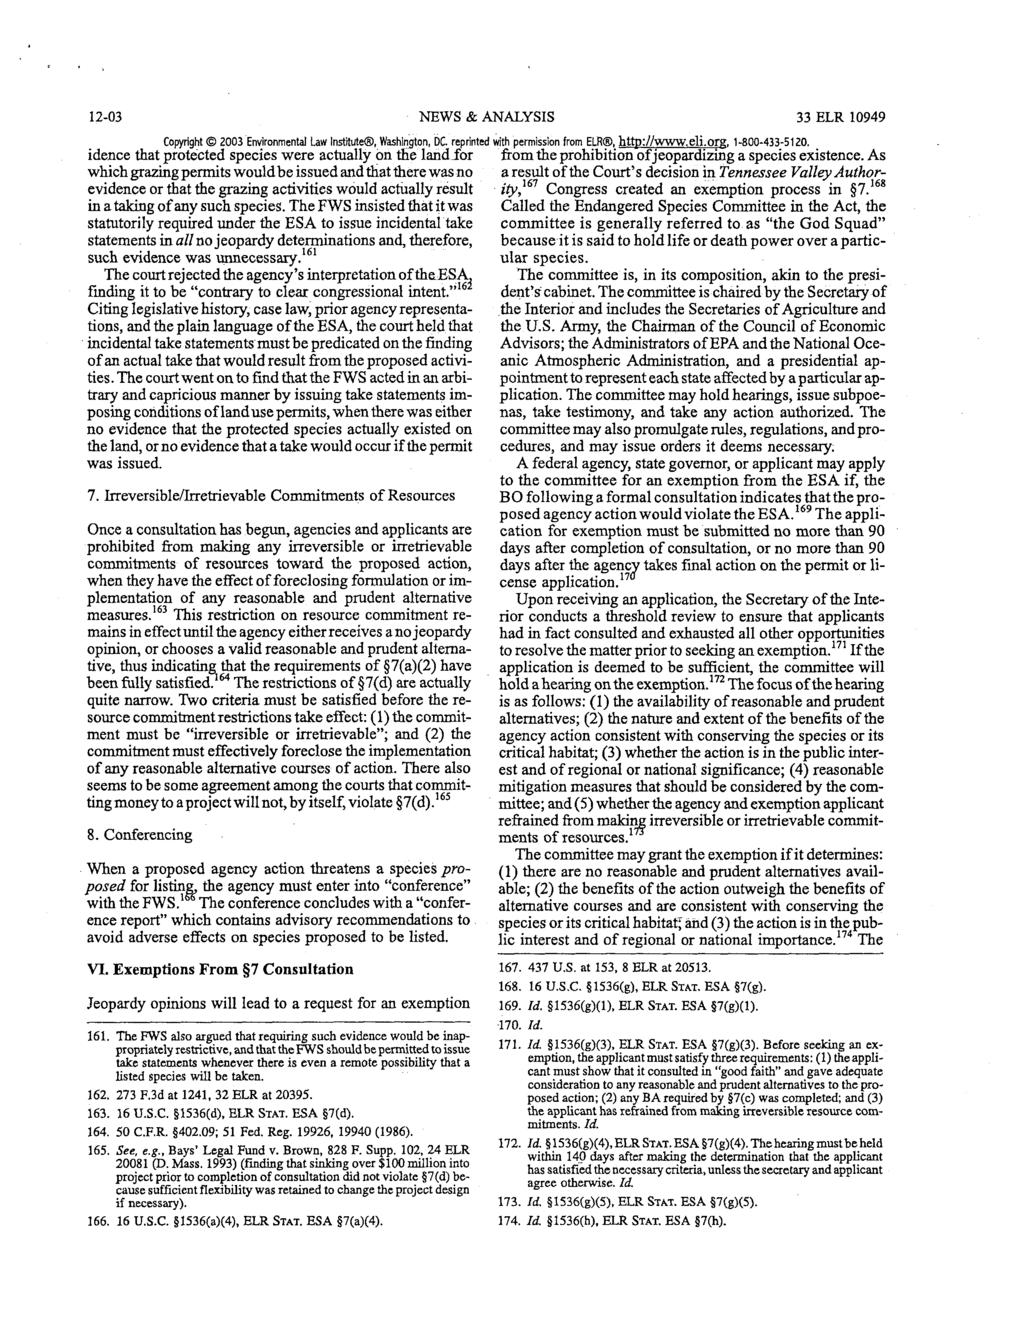 12-03 NEWS & ANALYSIS 33 ELR 10949 Copyright 2003 Environmental Law Institute, Washington, DC. repn reprinted with permission from ELR, http://www.eli.org. m 1-800-433-5120.